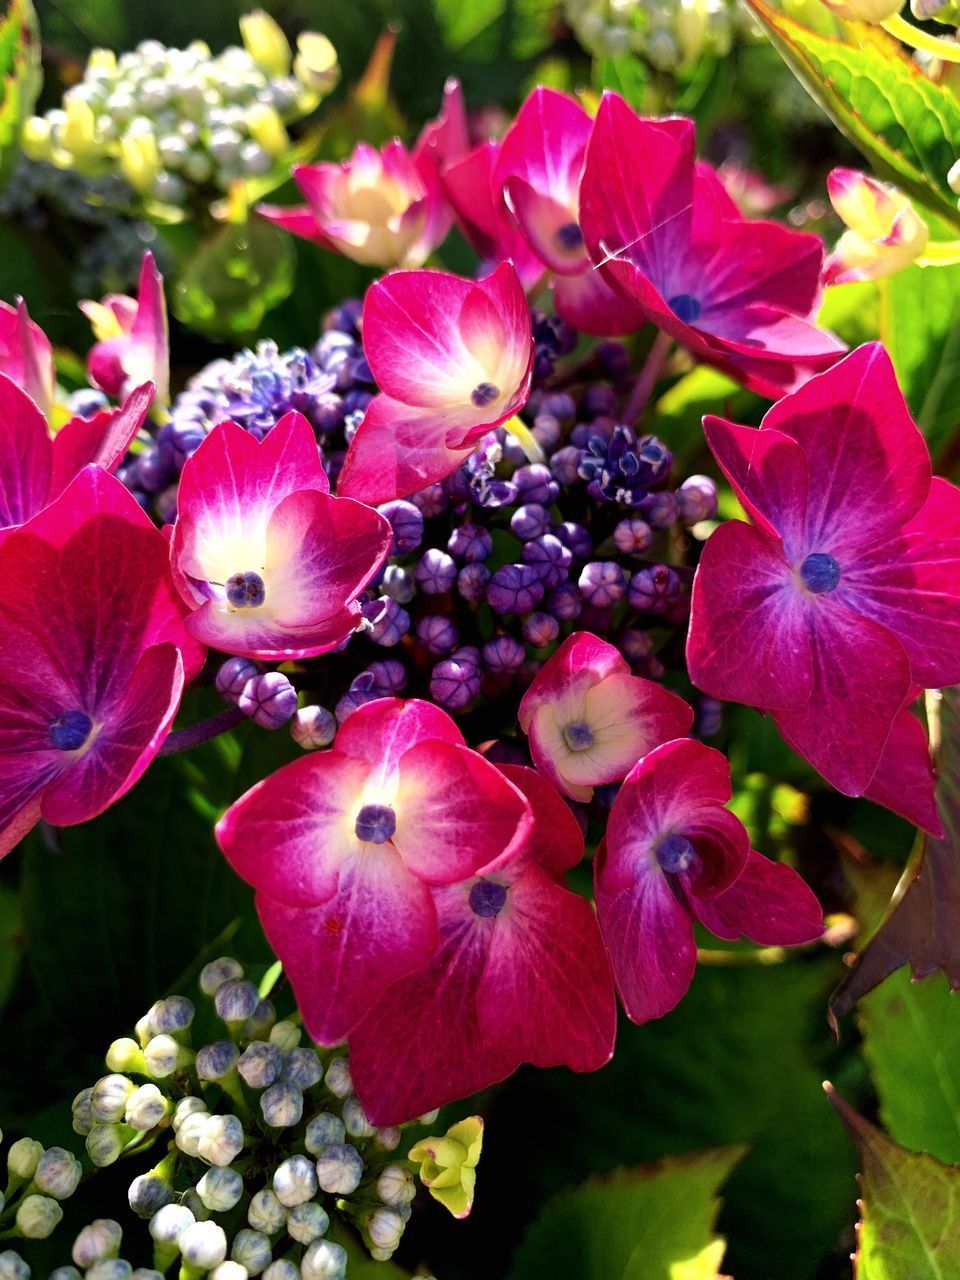 CLOSE-UP OF PINK AND PURPLE FLOWERS